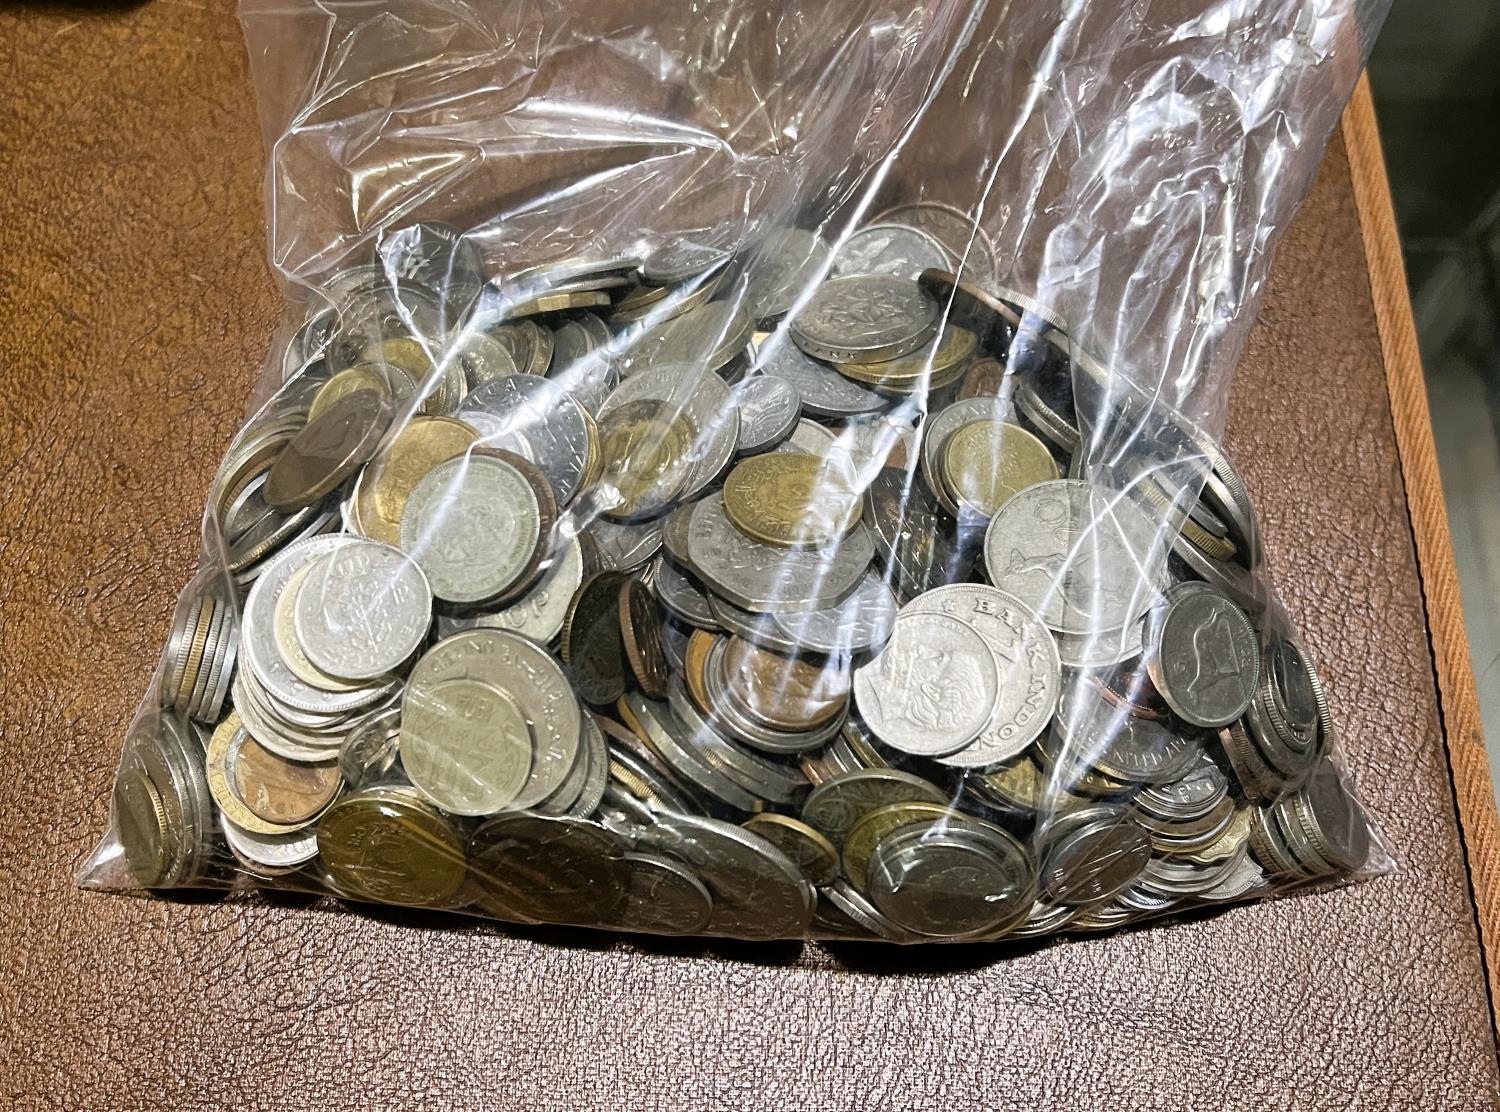 A quantity of foreign coins